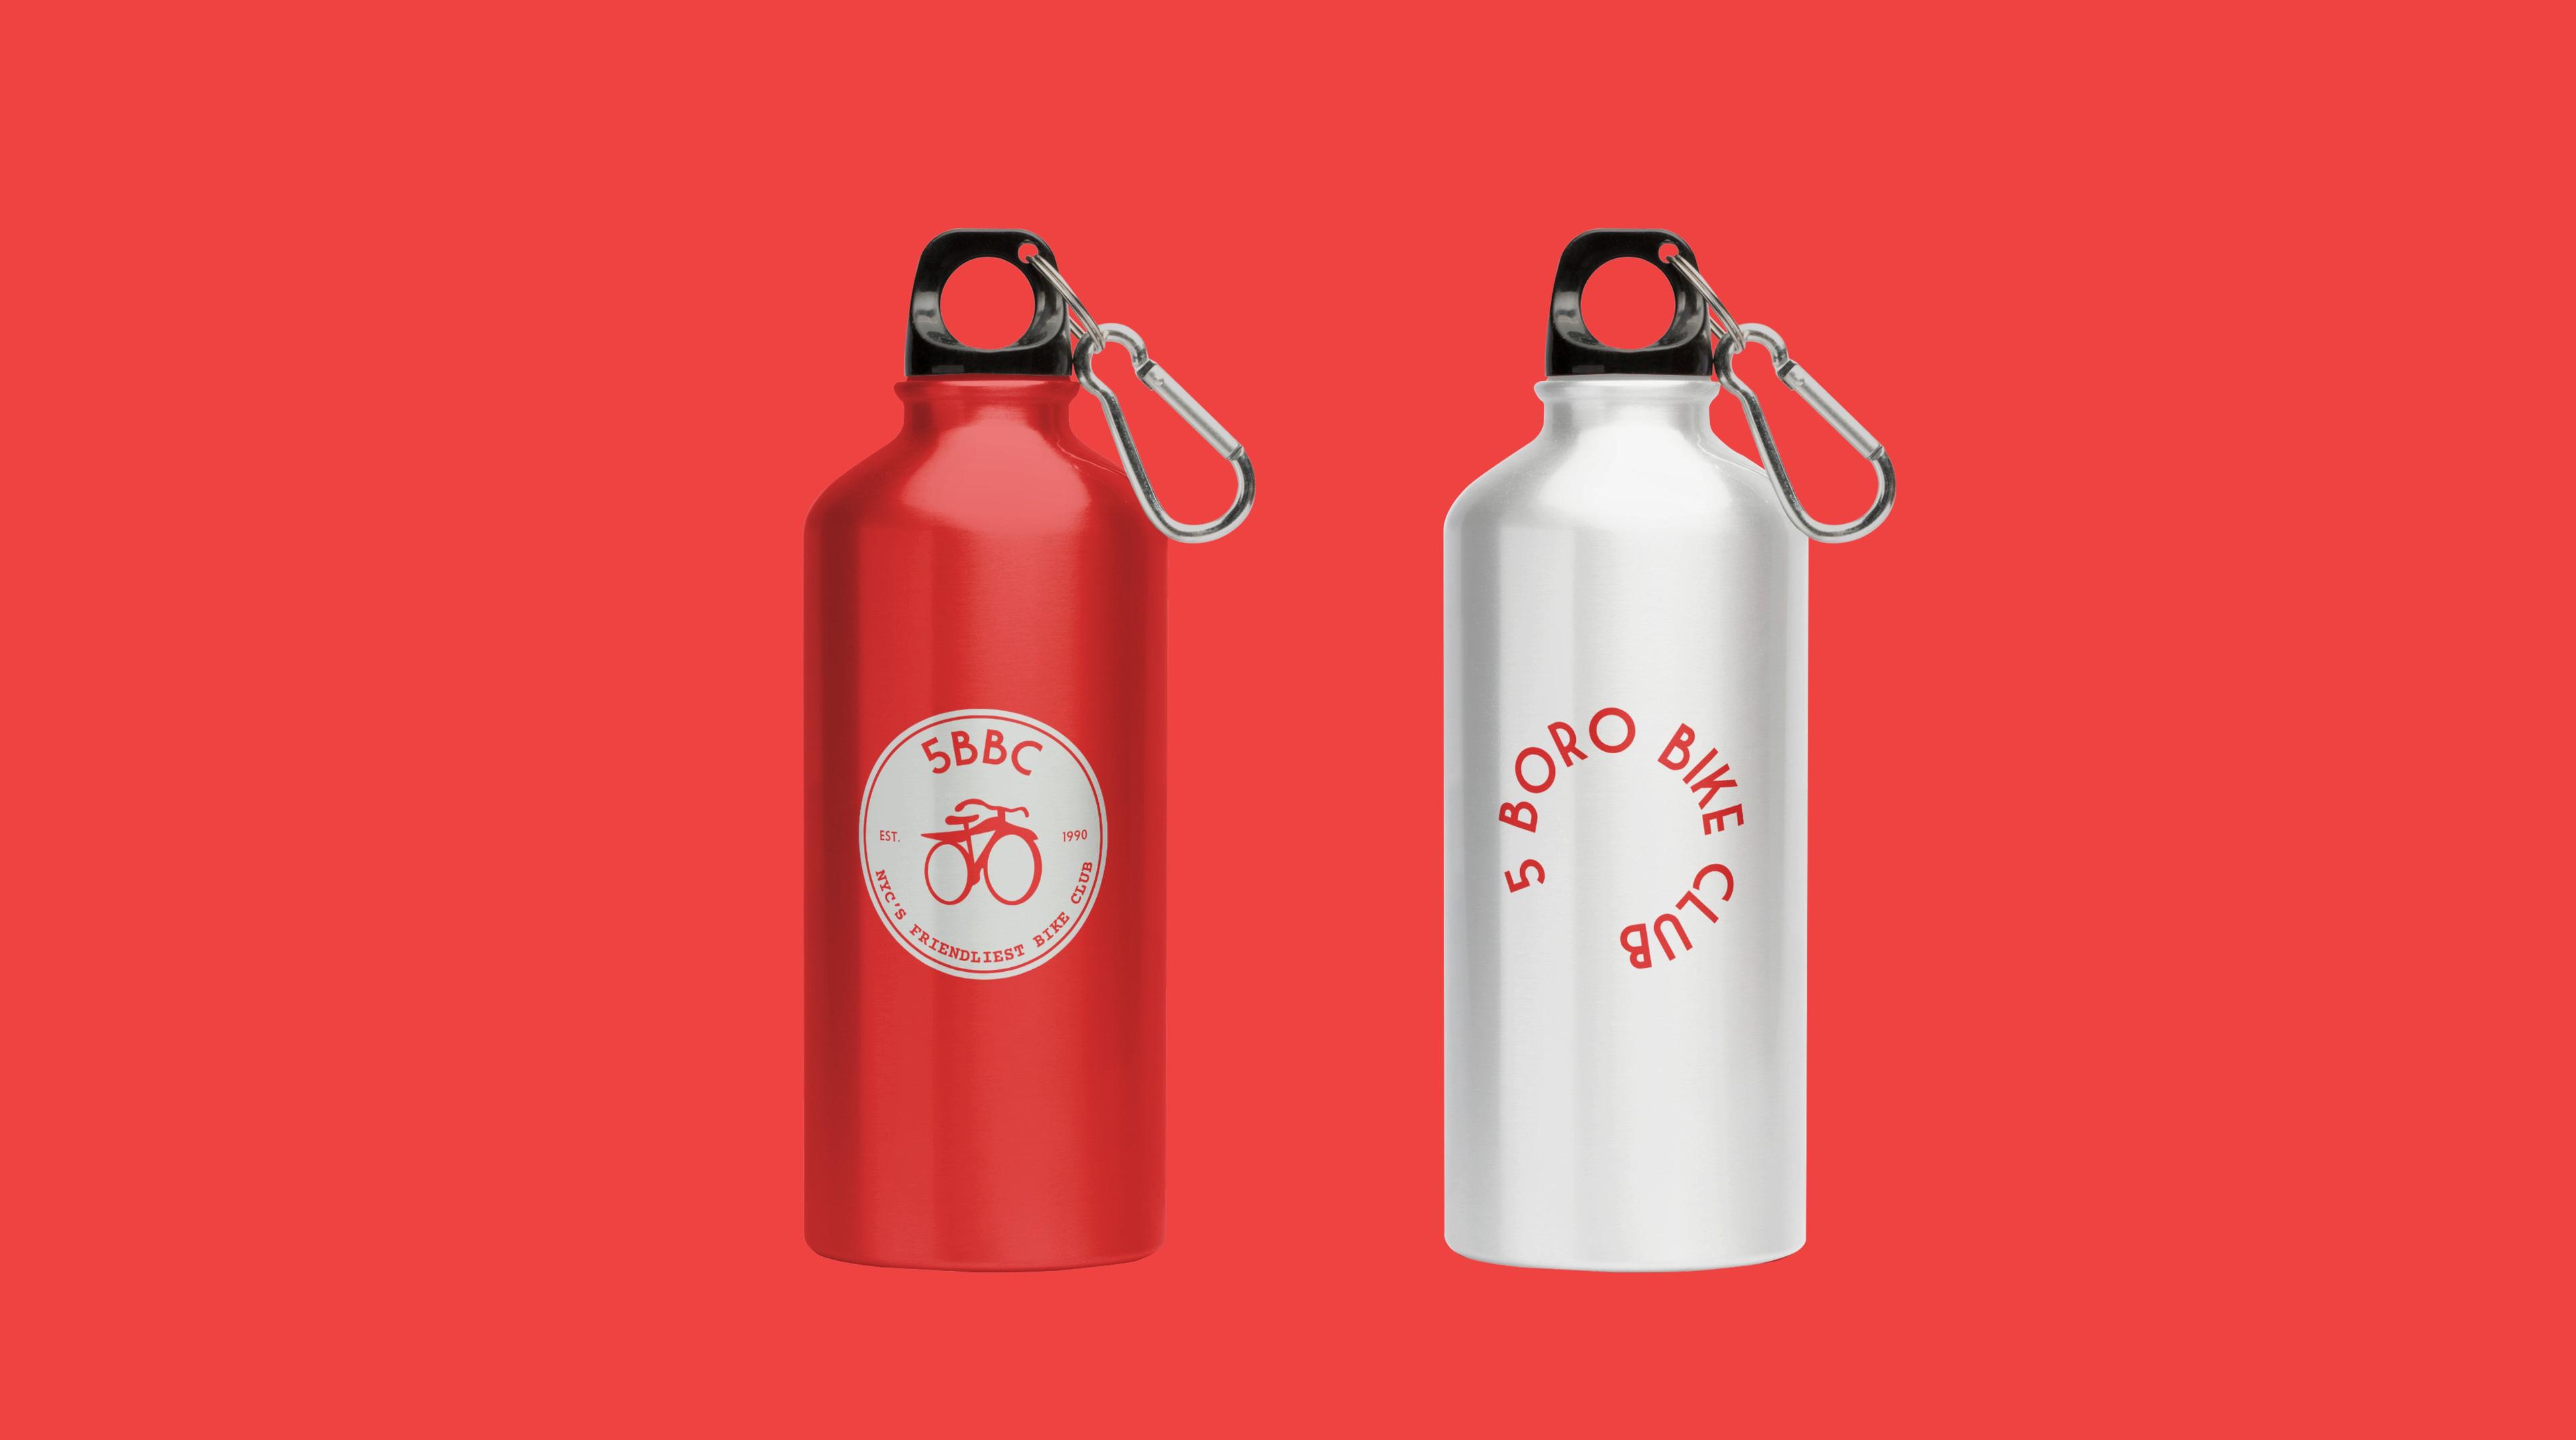 5BBC branding on red and white metal bottles